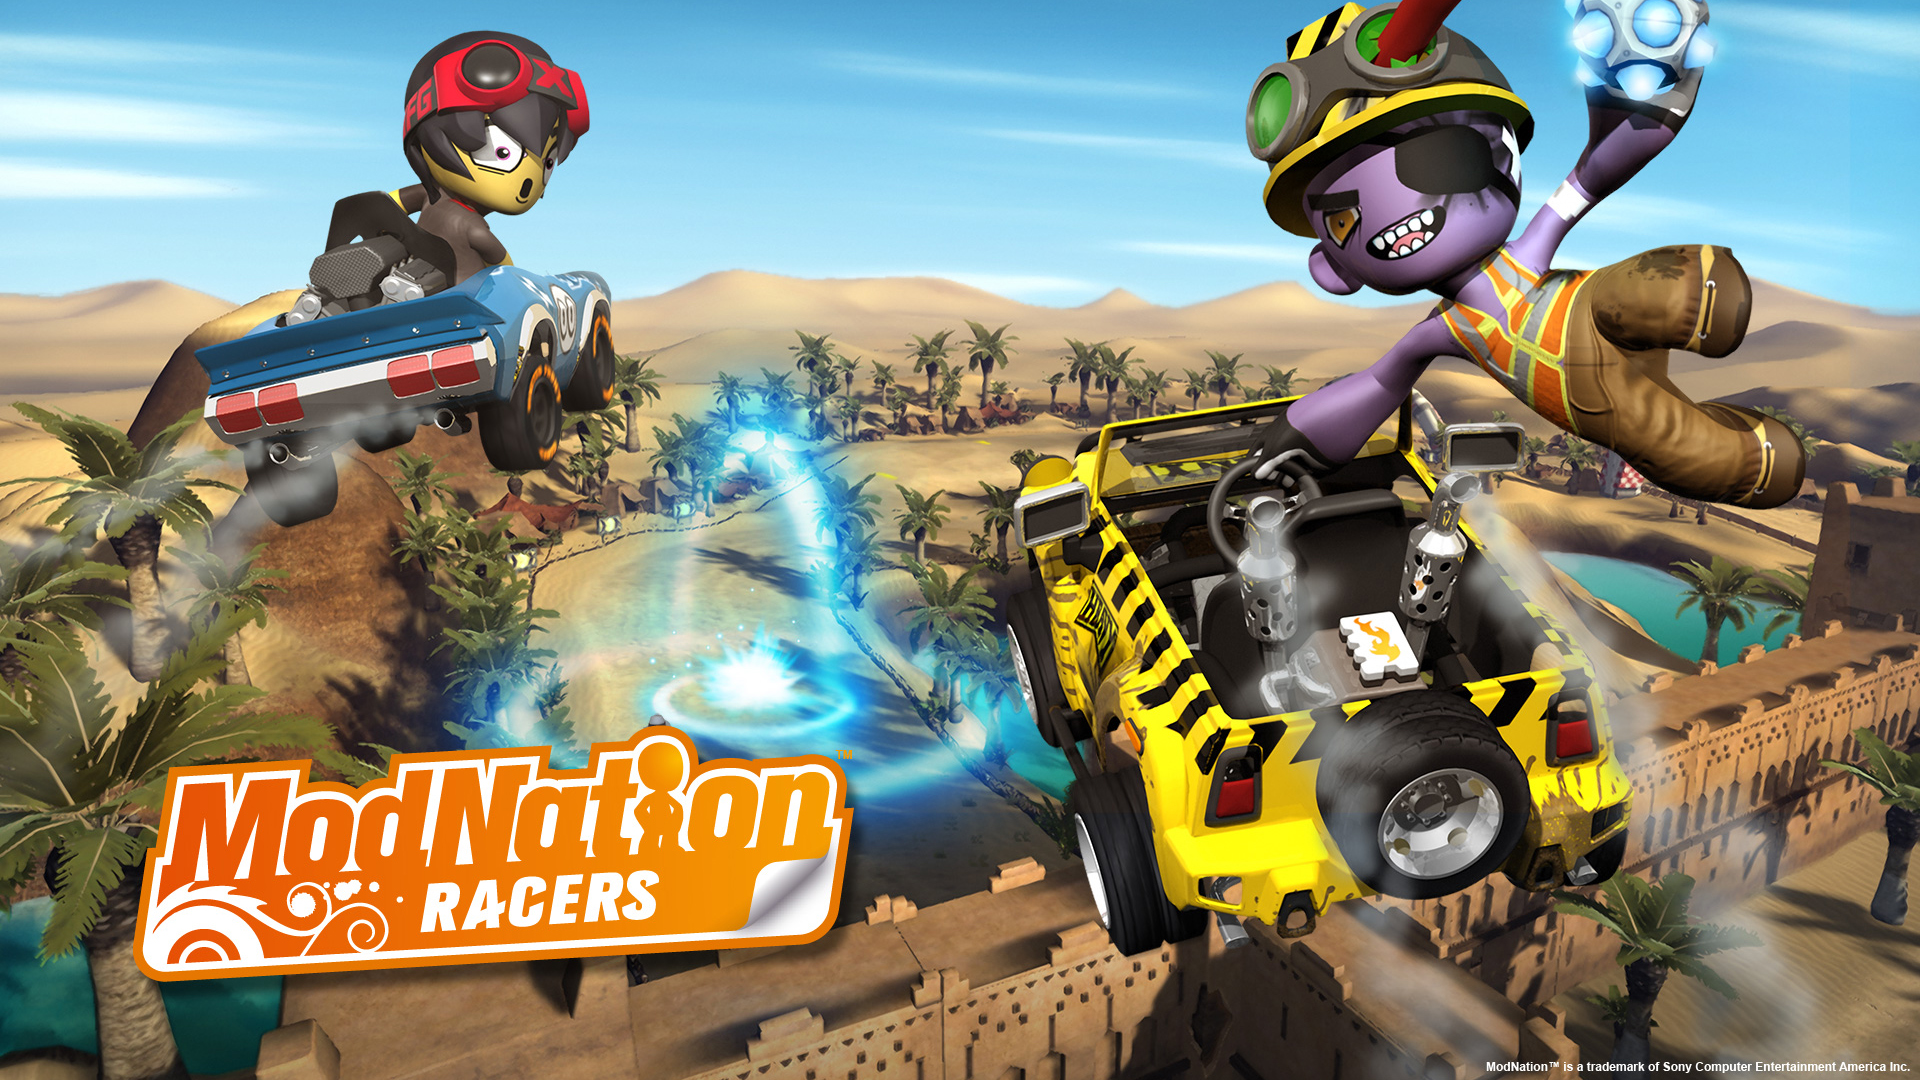 download modnation racers road trip for free